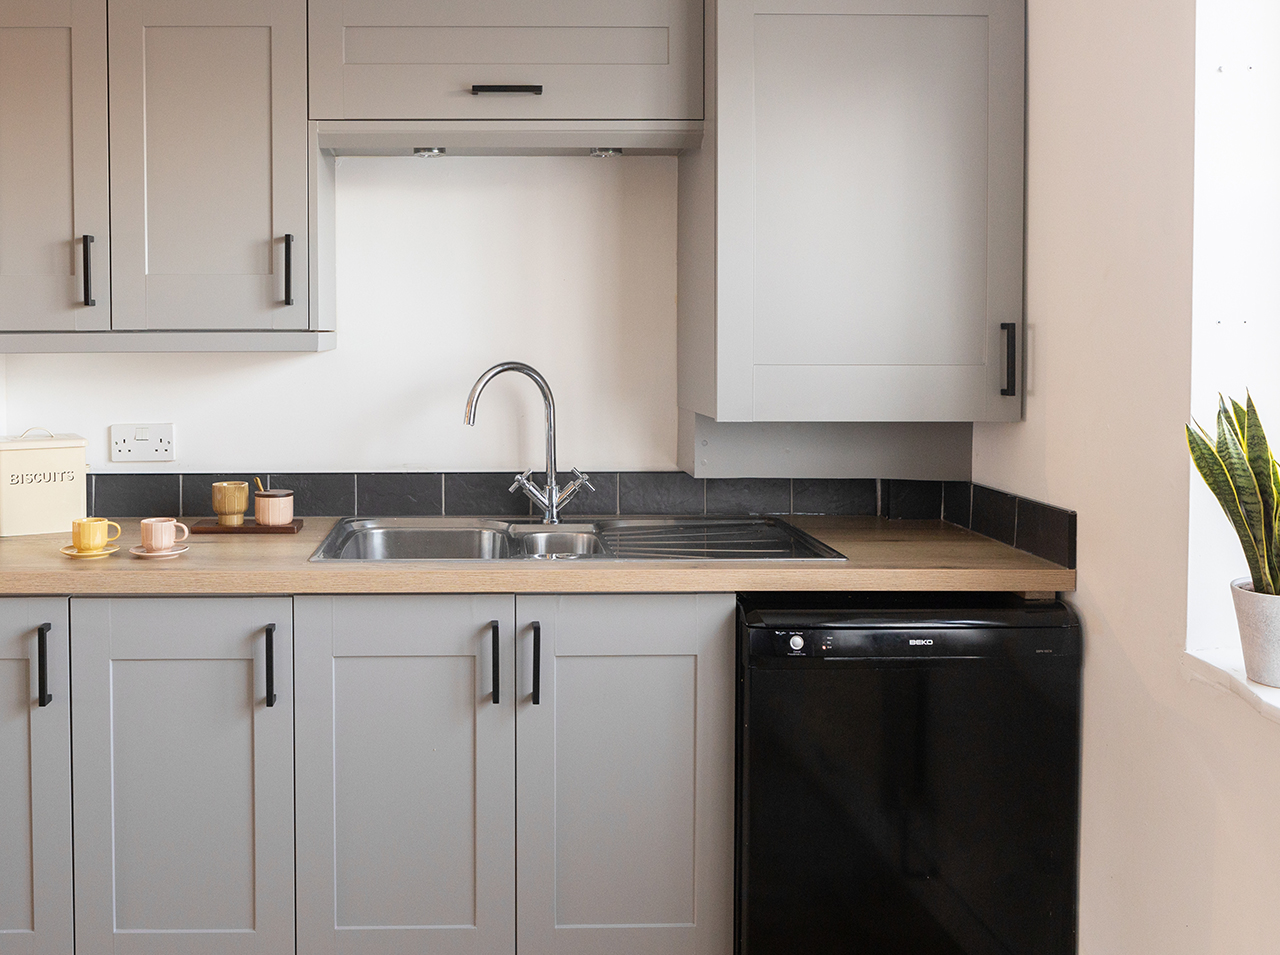 Kitchen unit with gray matte fronts and angular black handles.